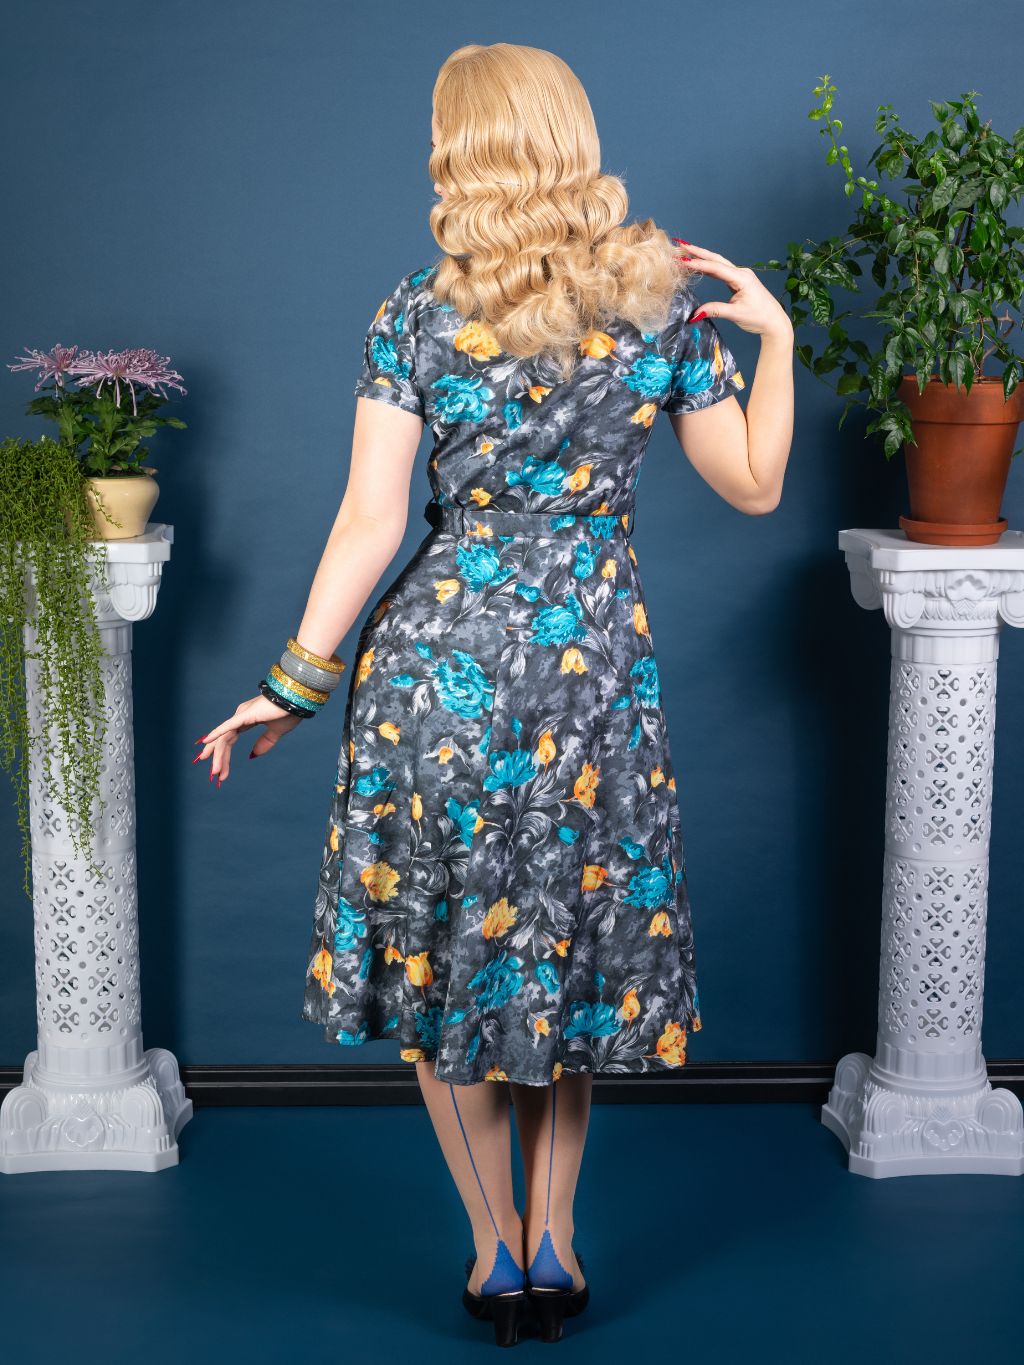 back view of retro 1950s grey dress with  floral print in burnt orange and turquoise worn with blue seamed stockings